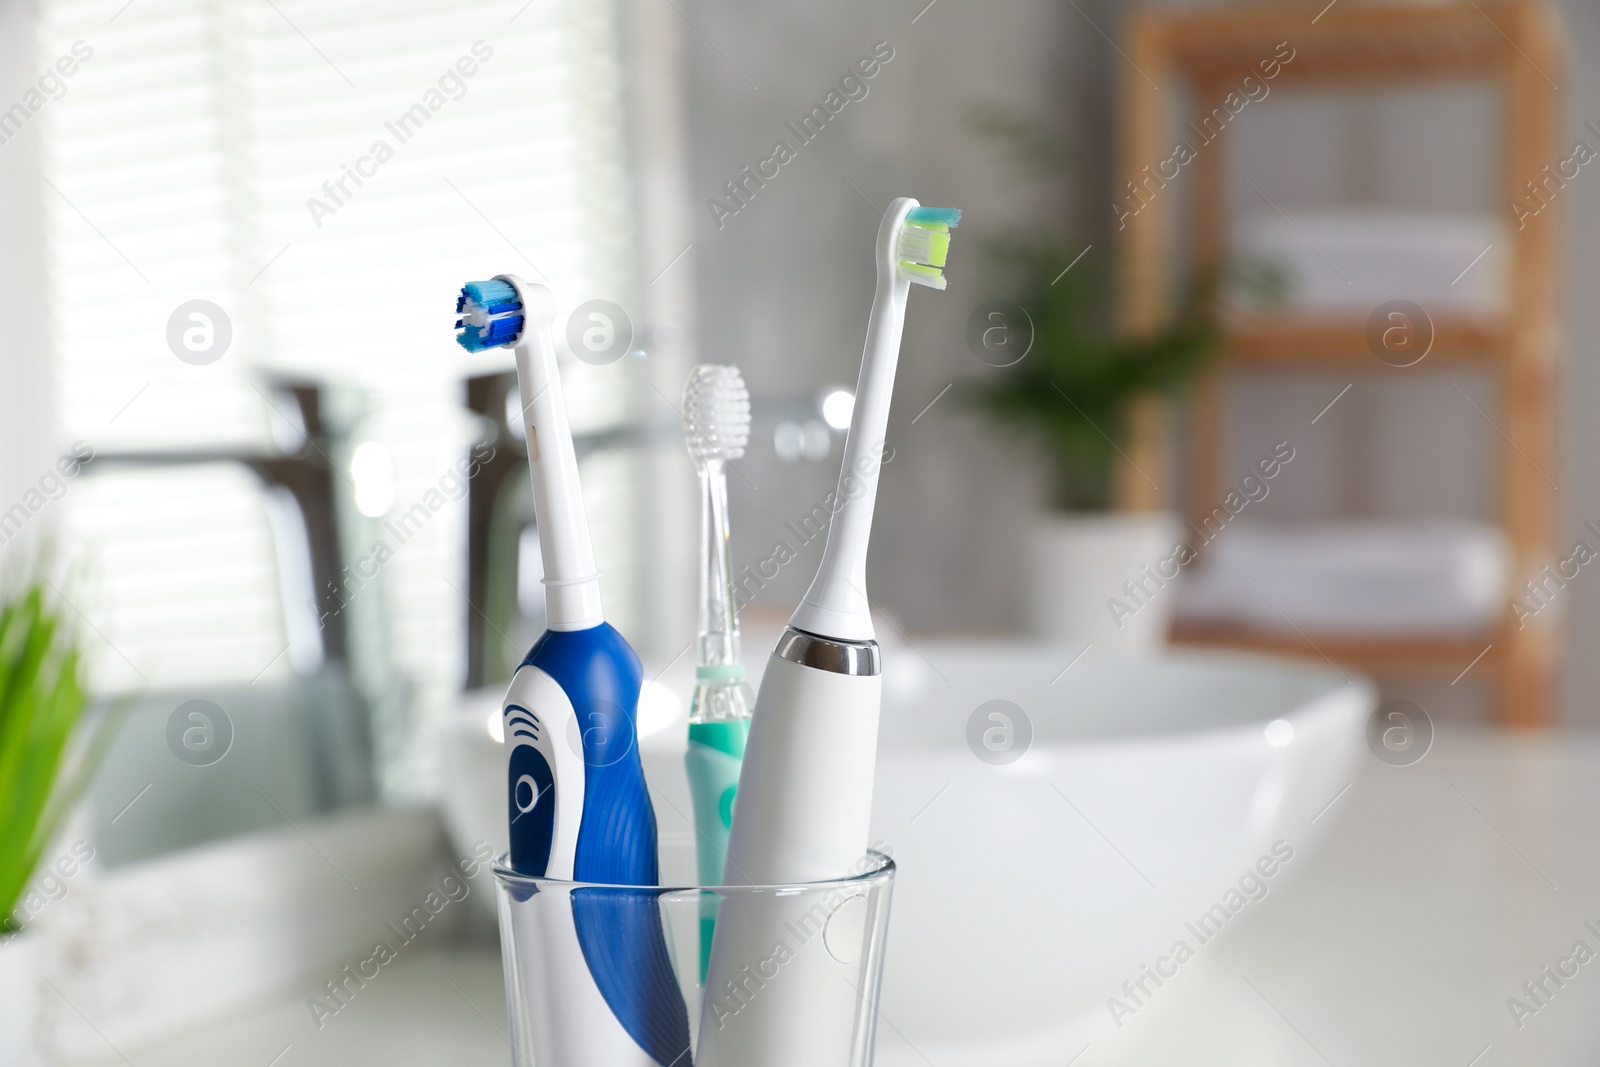 Photo of Electric toothbrushes in glass holder indoors, closeup